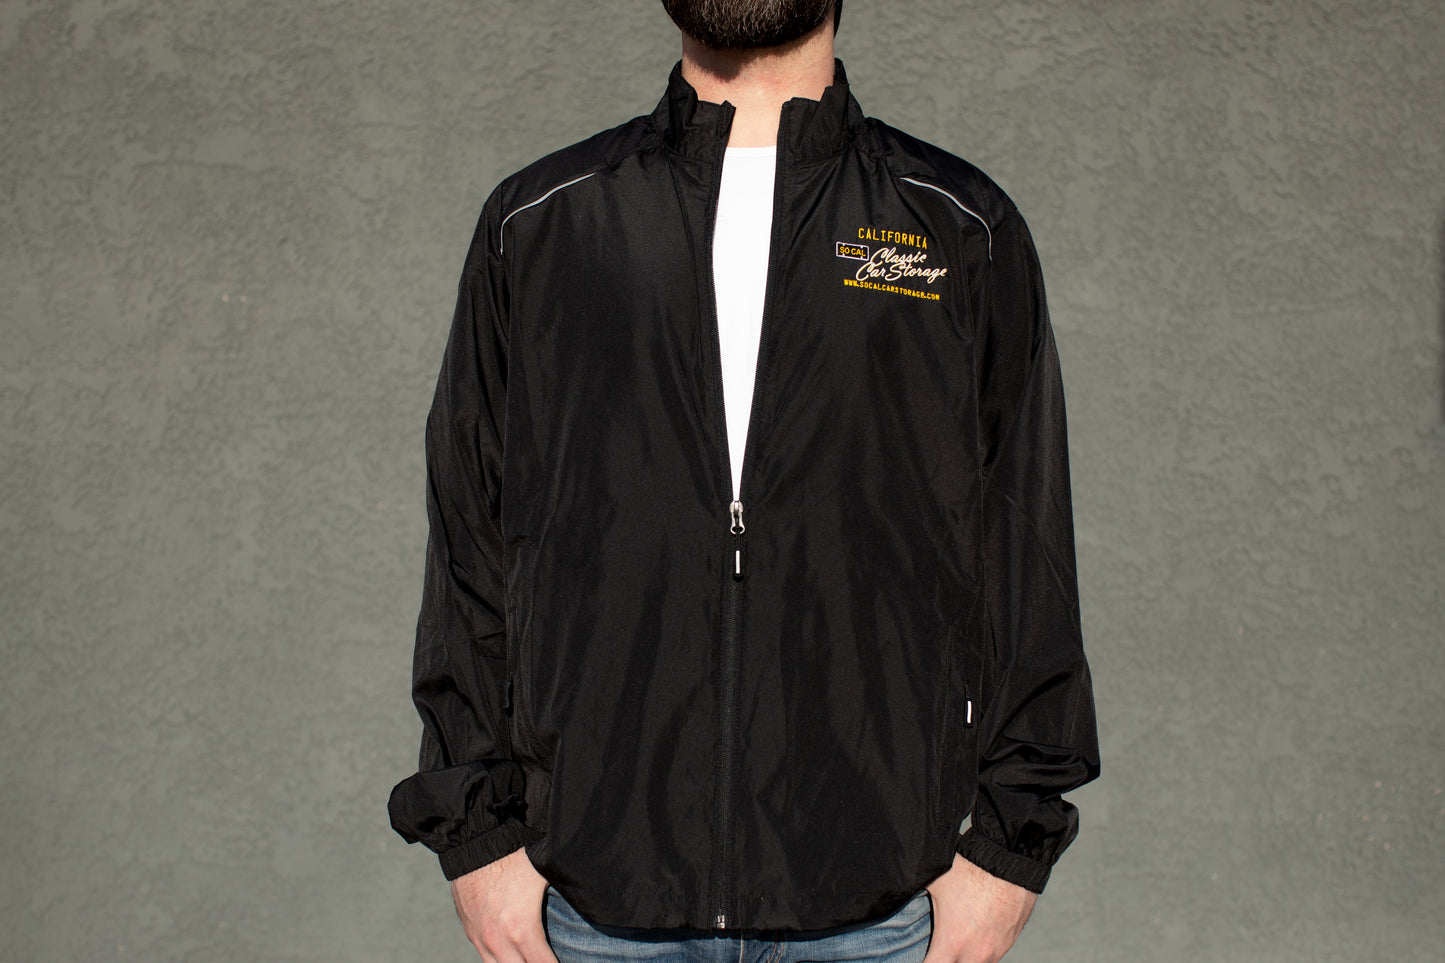 SOCAL Classic Embroidered Windbreaker Jacket